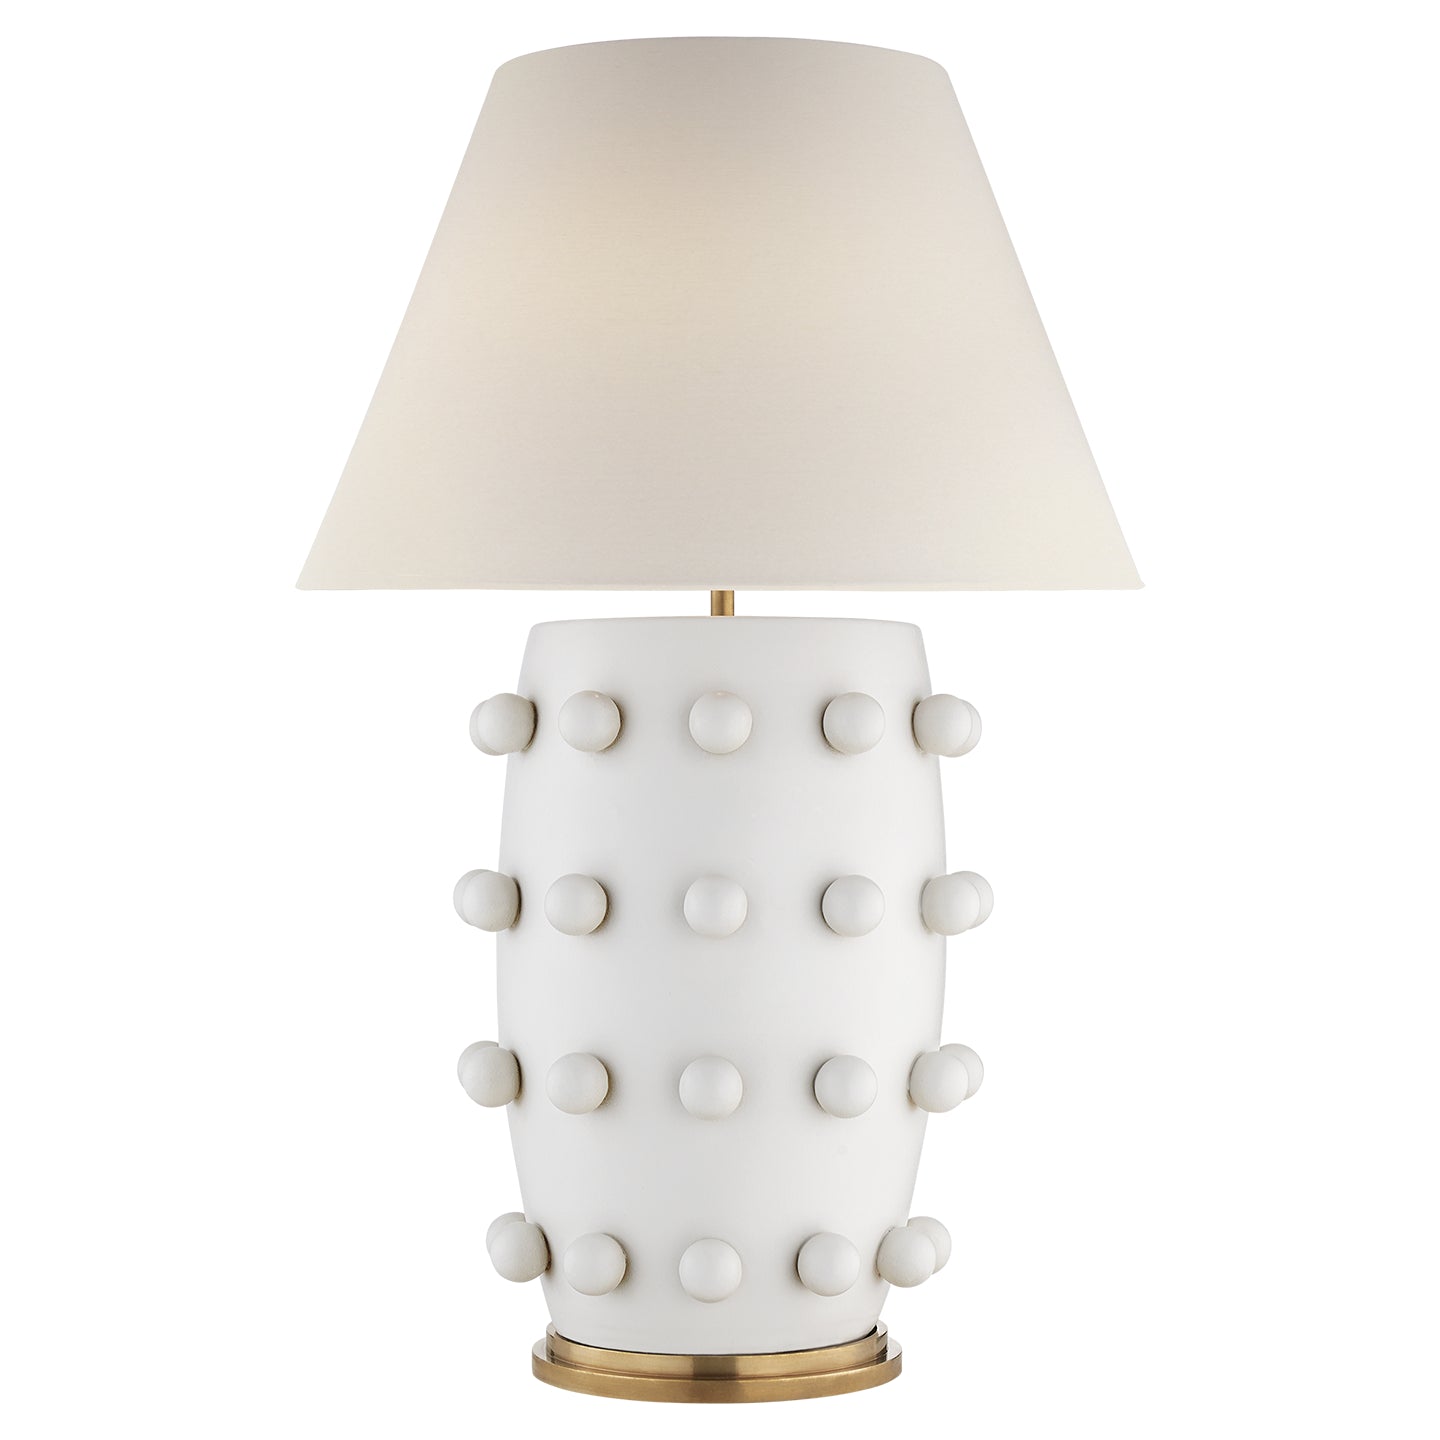 Visual Comfort Signature - KW 3032PW-L - One Light Table Lamp - Linden - Plaster White